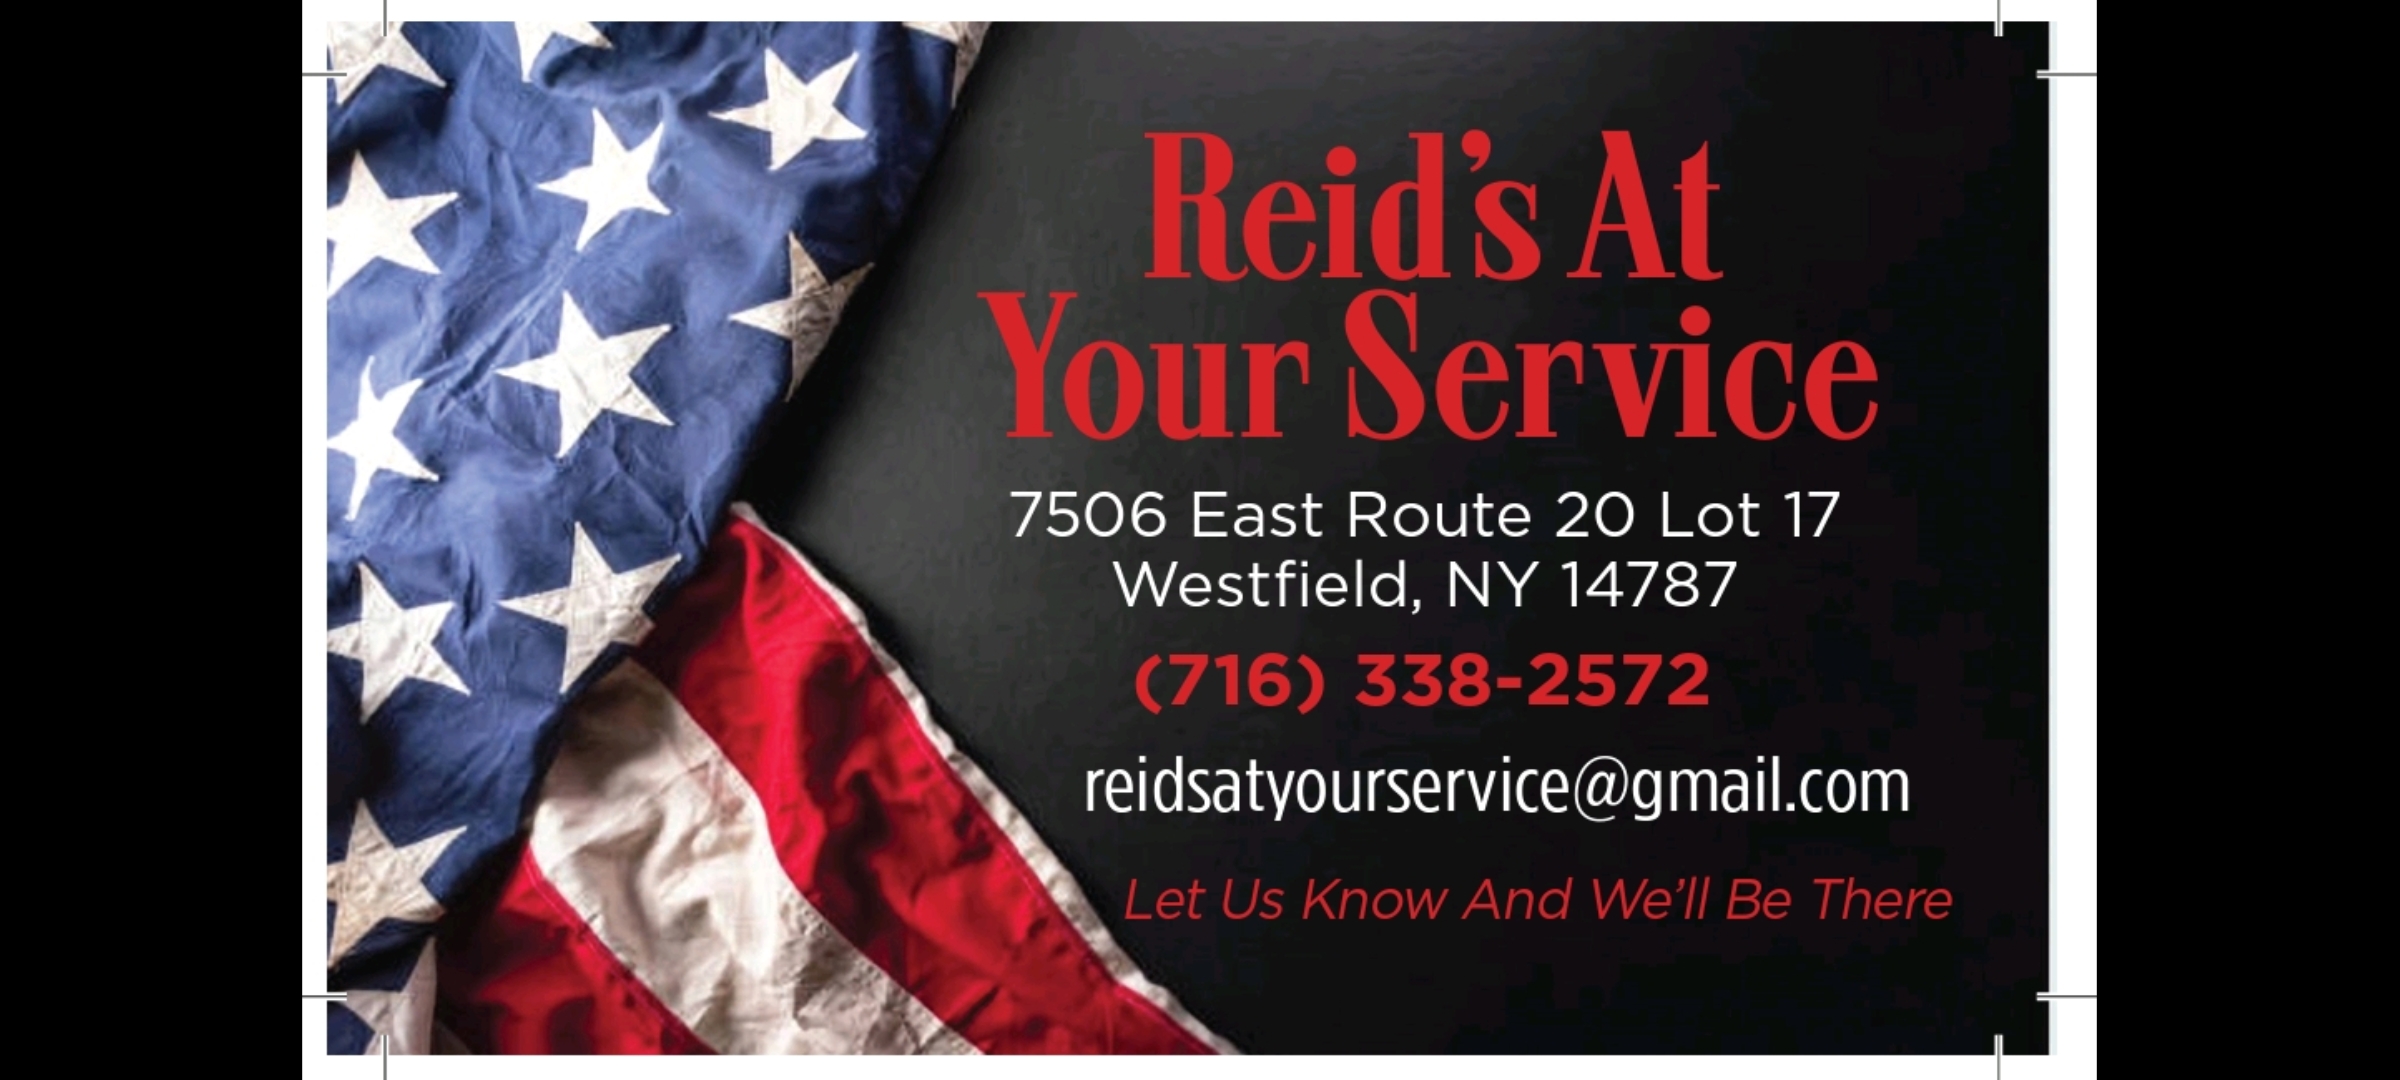 Reid's At Your Service Logo